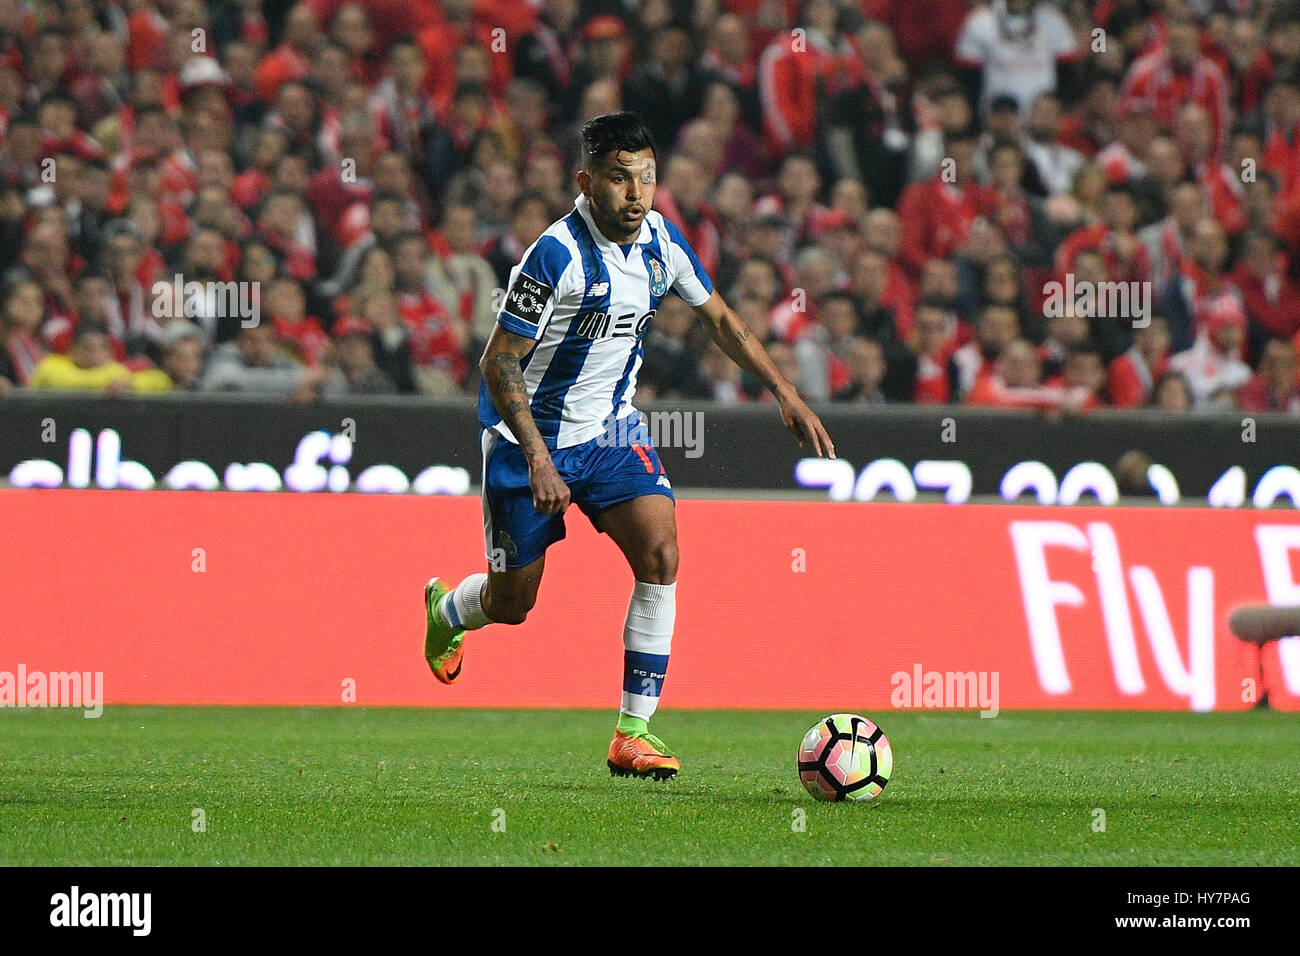 Portugal, Lisbon, April 1, 2017 -  FOOTBALL: PORTUGAL x FC PORTO - Jesus Manuel Corona #17 PortoÕs forward from Mexico in action during Portuguese First League football match between SL Benfica and FC Porto in Luz Stadium on April 1, 2017 in Lisbon, Portugal. Photo: Bruno de Carvalho / Alamy Stock Photo